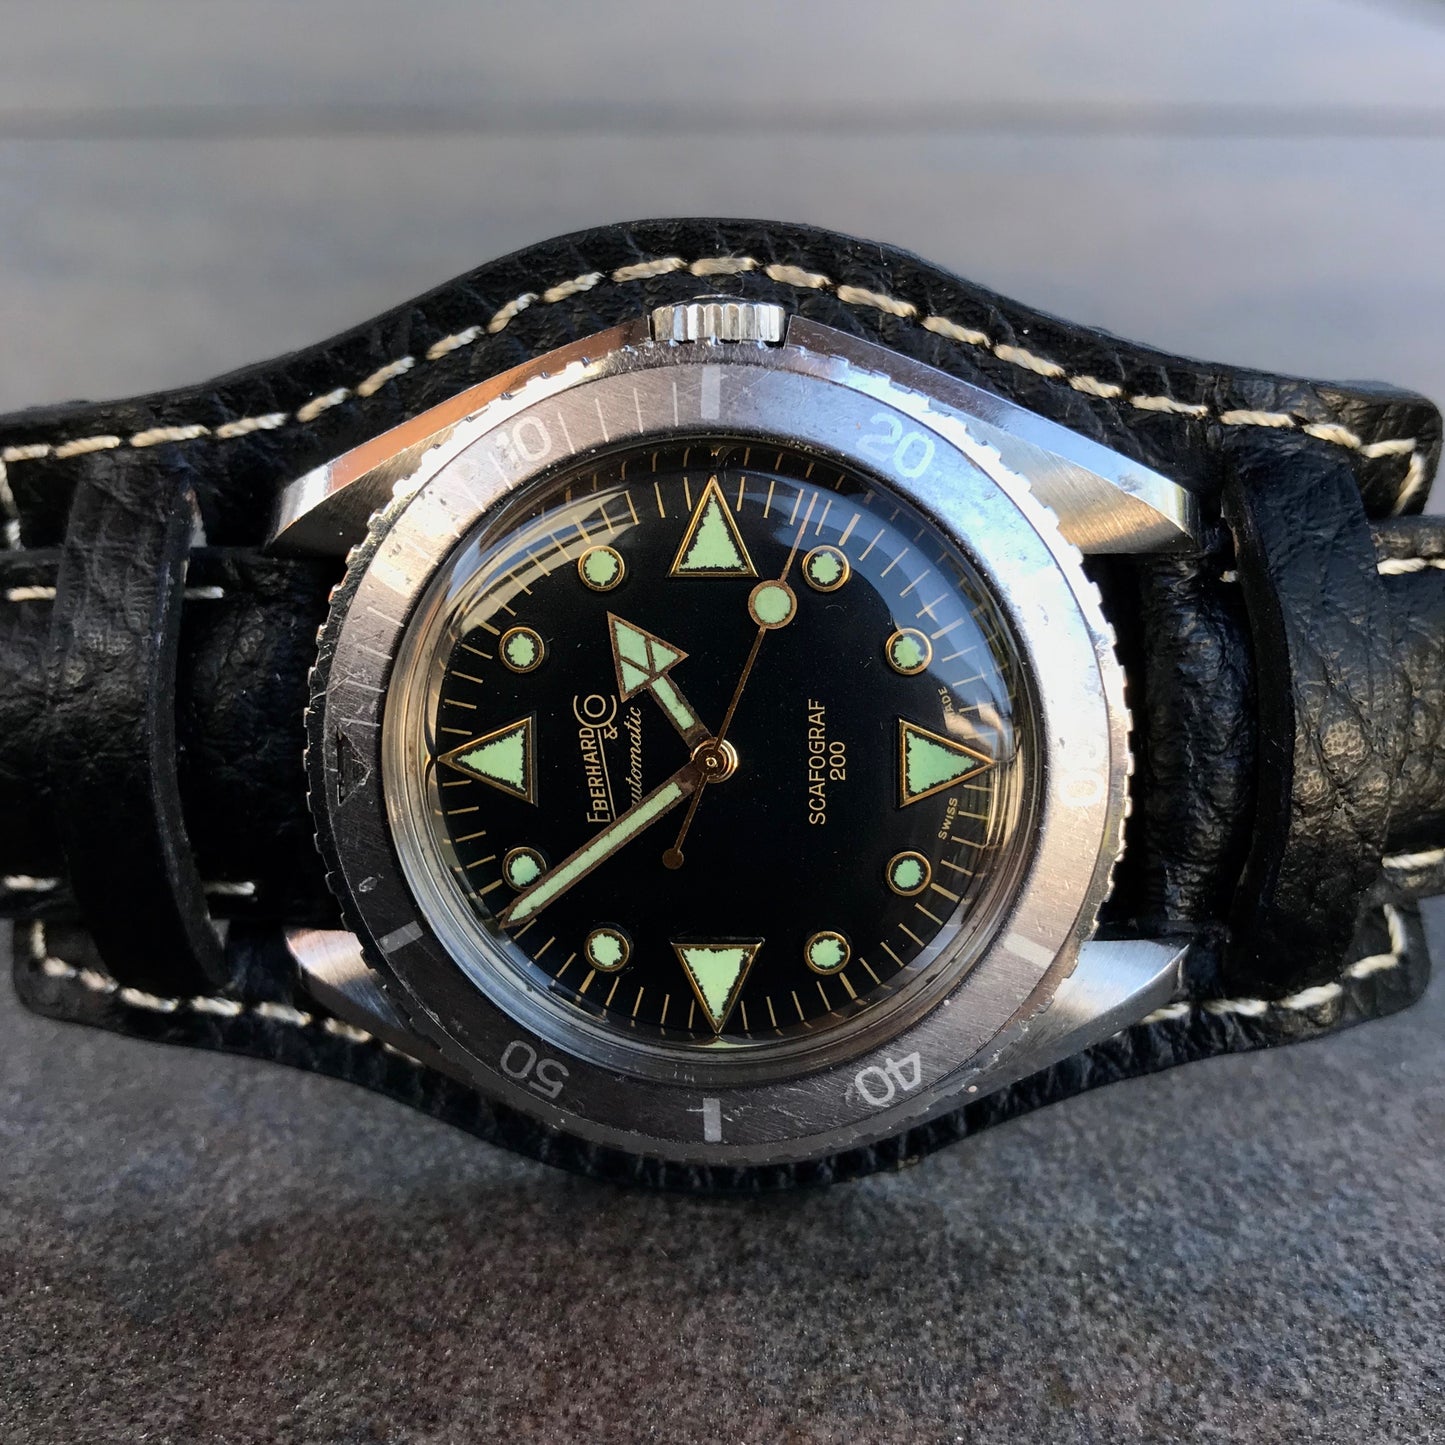 Vintage Eberhard & Co. Scafograf 200 Stainless Steel Divers Gilt Wristwatch - Hashtag Watch Company